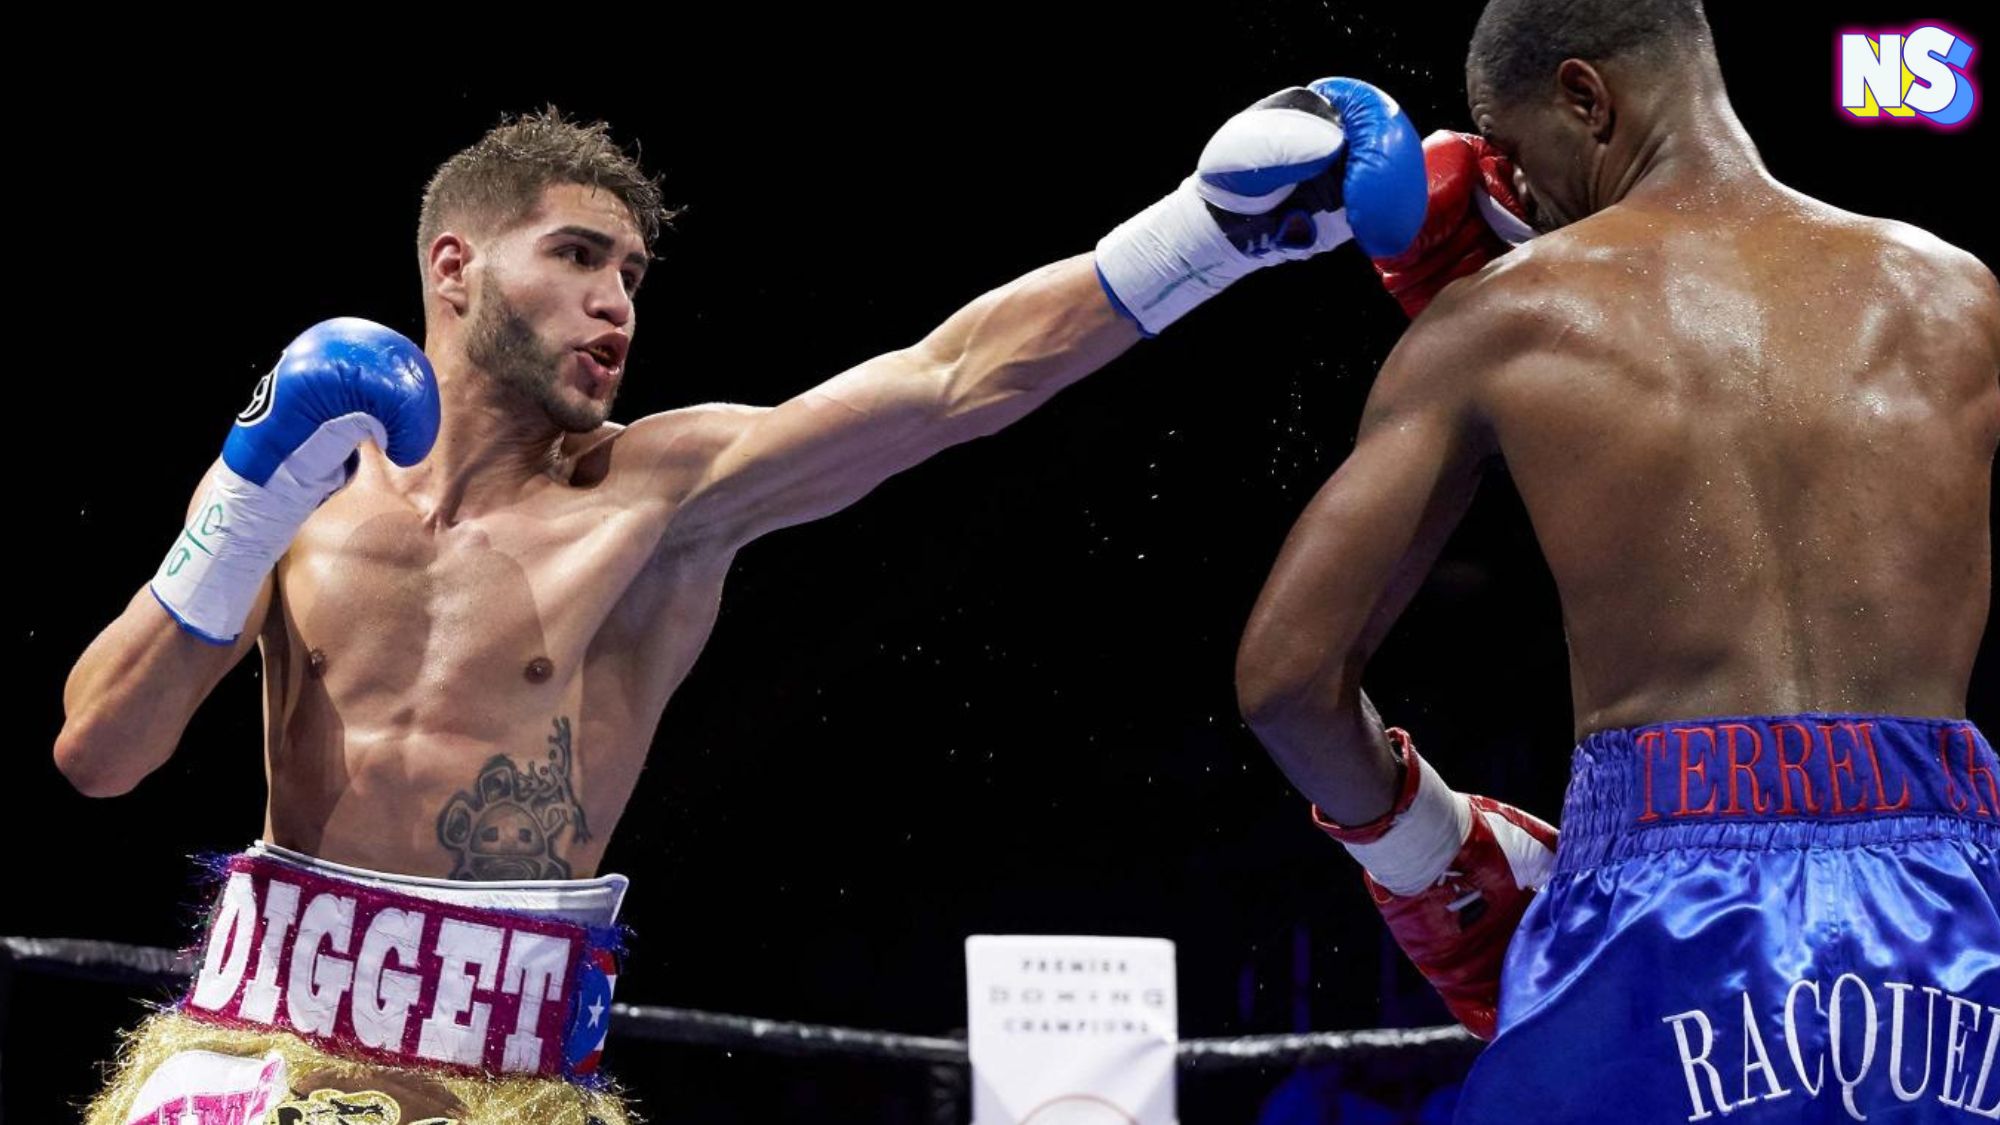 Photo of Prichard Colon and Terrel Williams by Suzanne Theresa/Premier Boxing Champion.